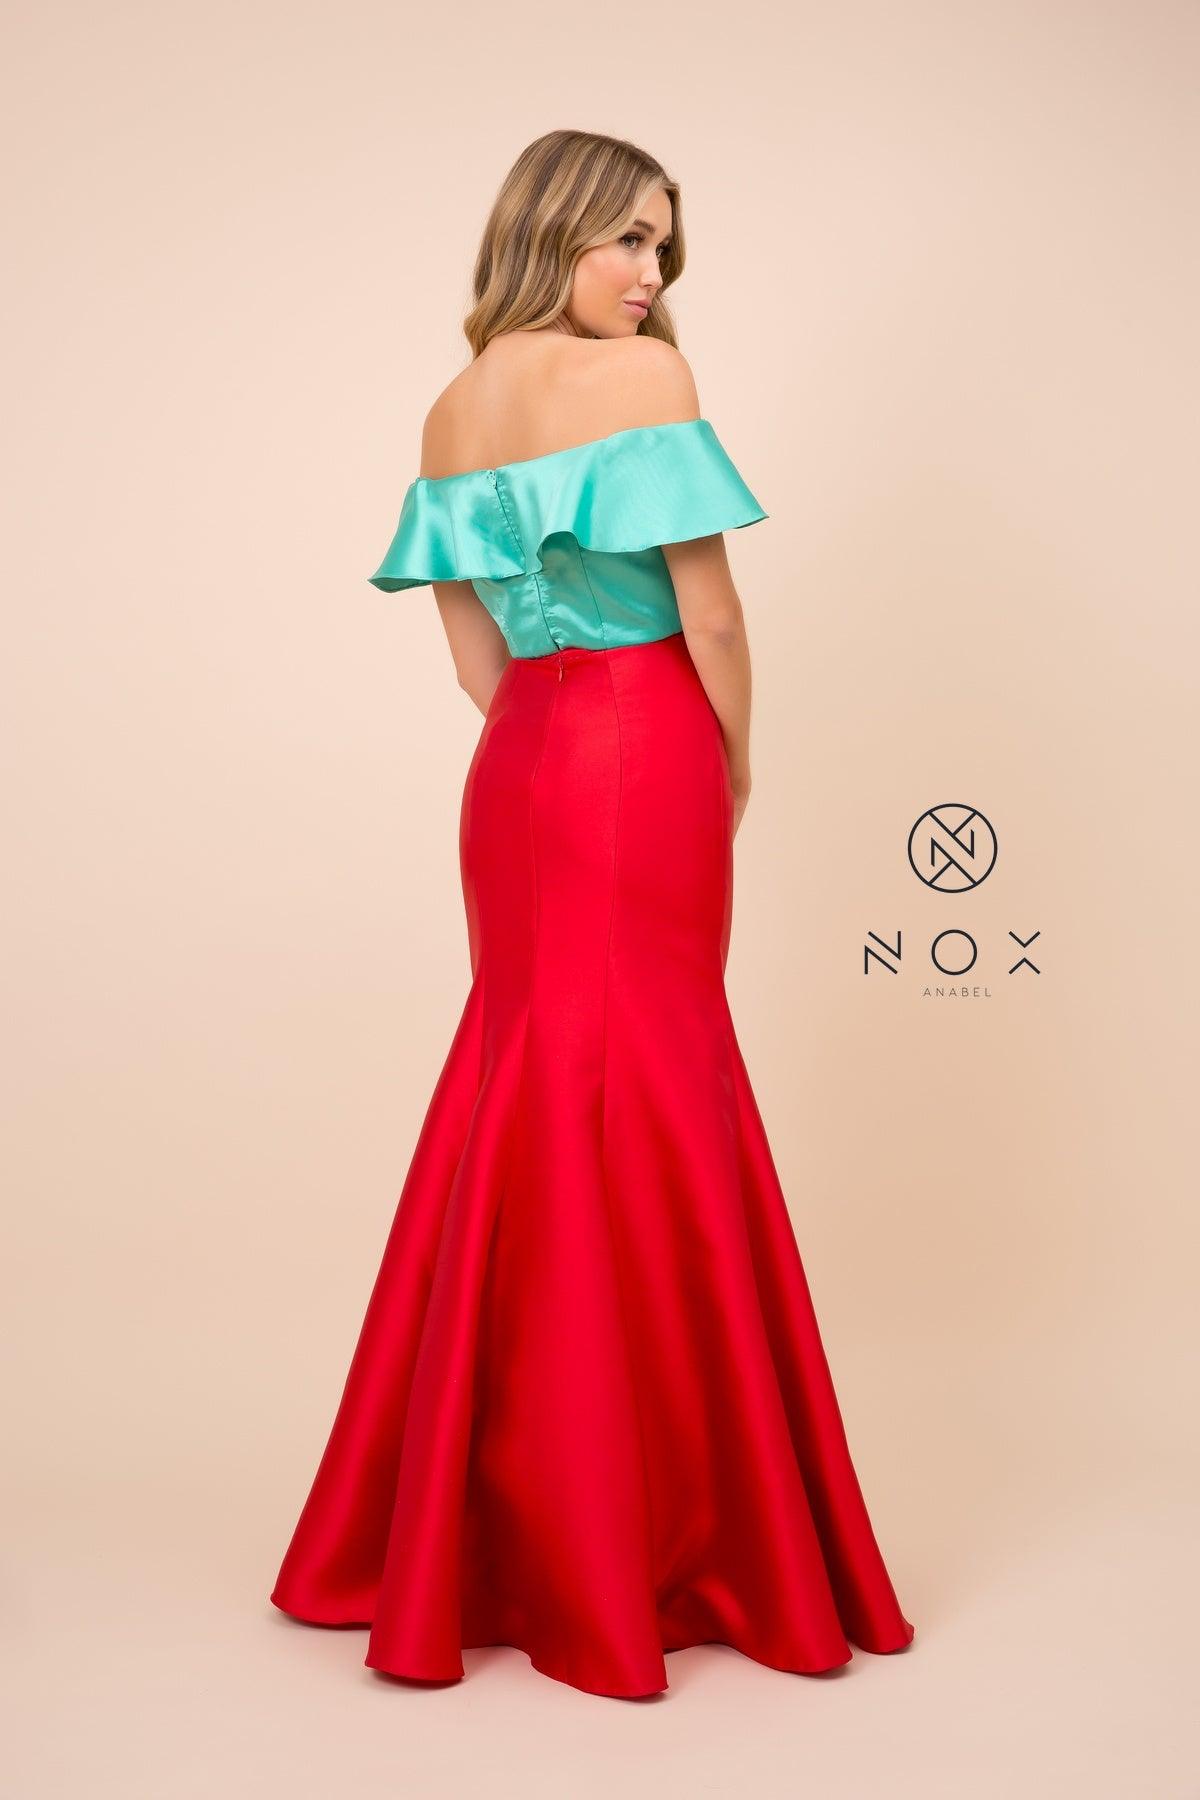 French Novelty: Madison James 20-389 Sheer Crop Top Prom Dress